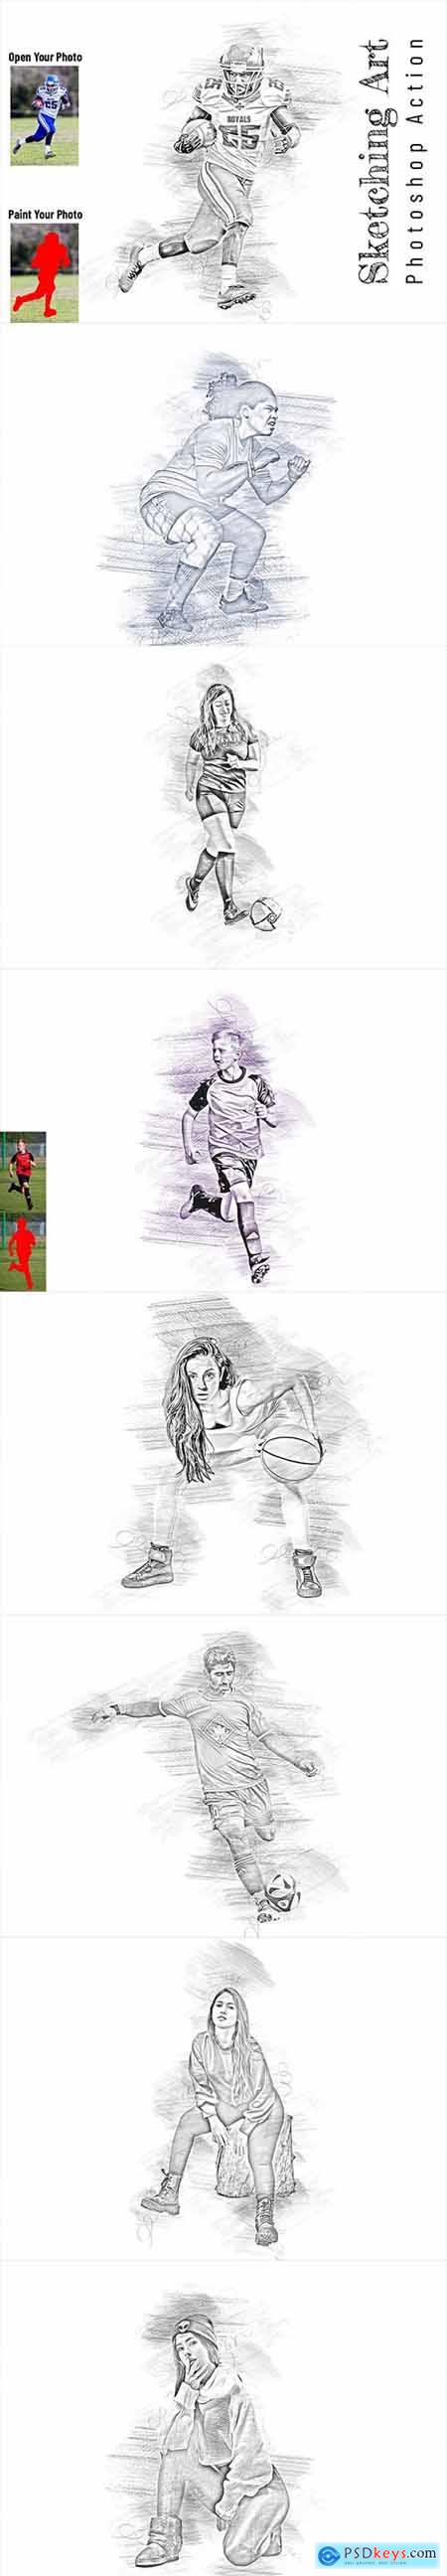 Sketching Art Photoshop Action 6680773